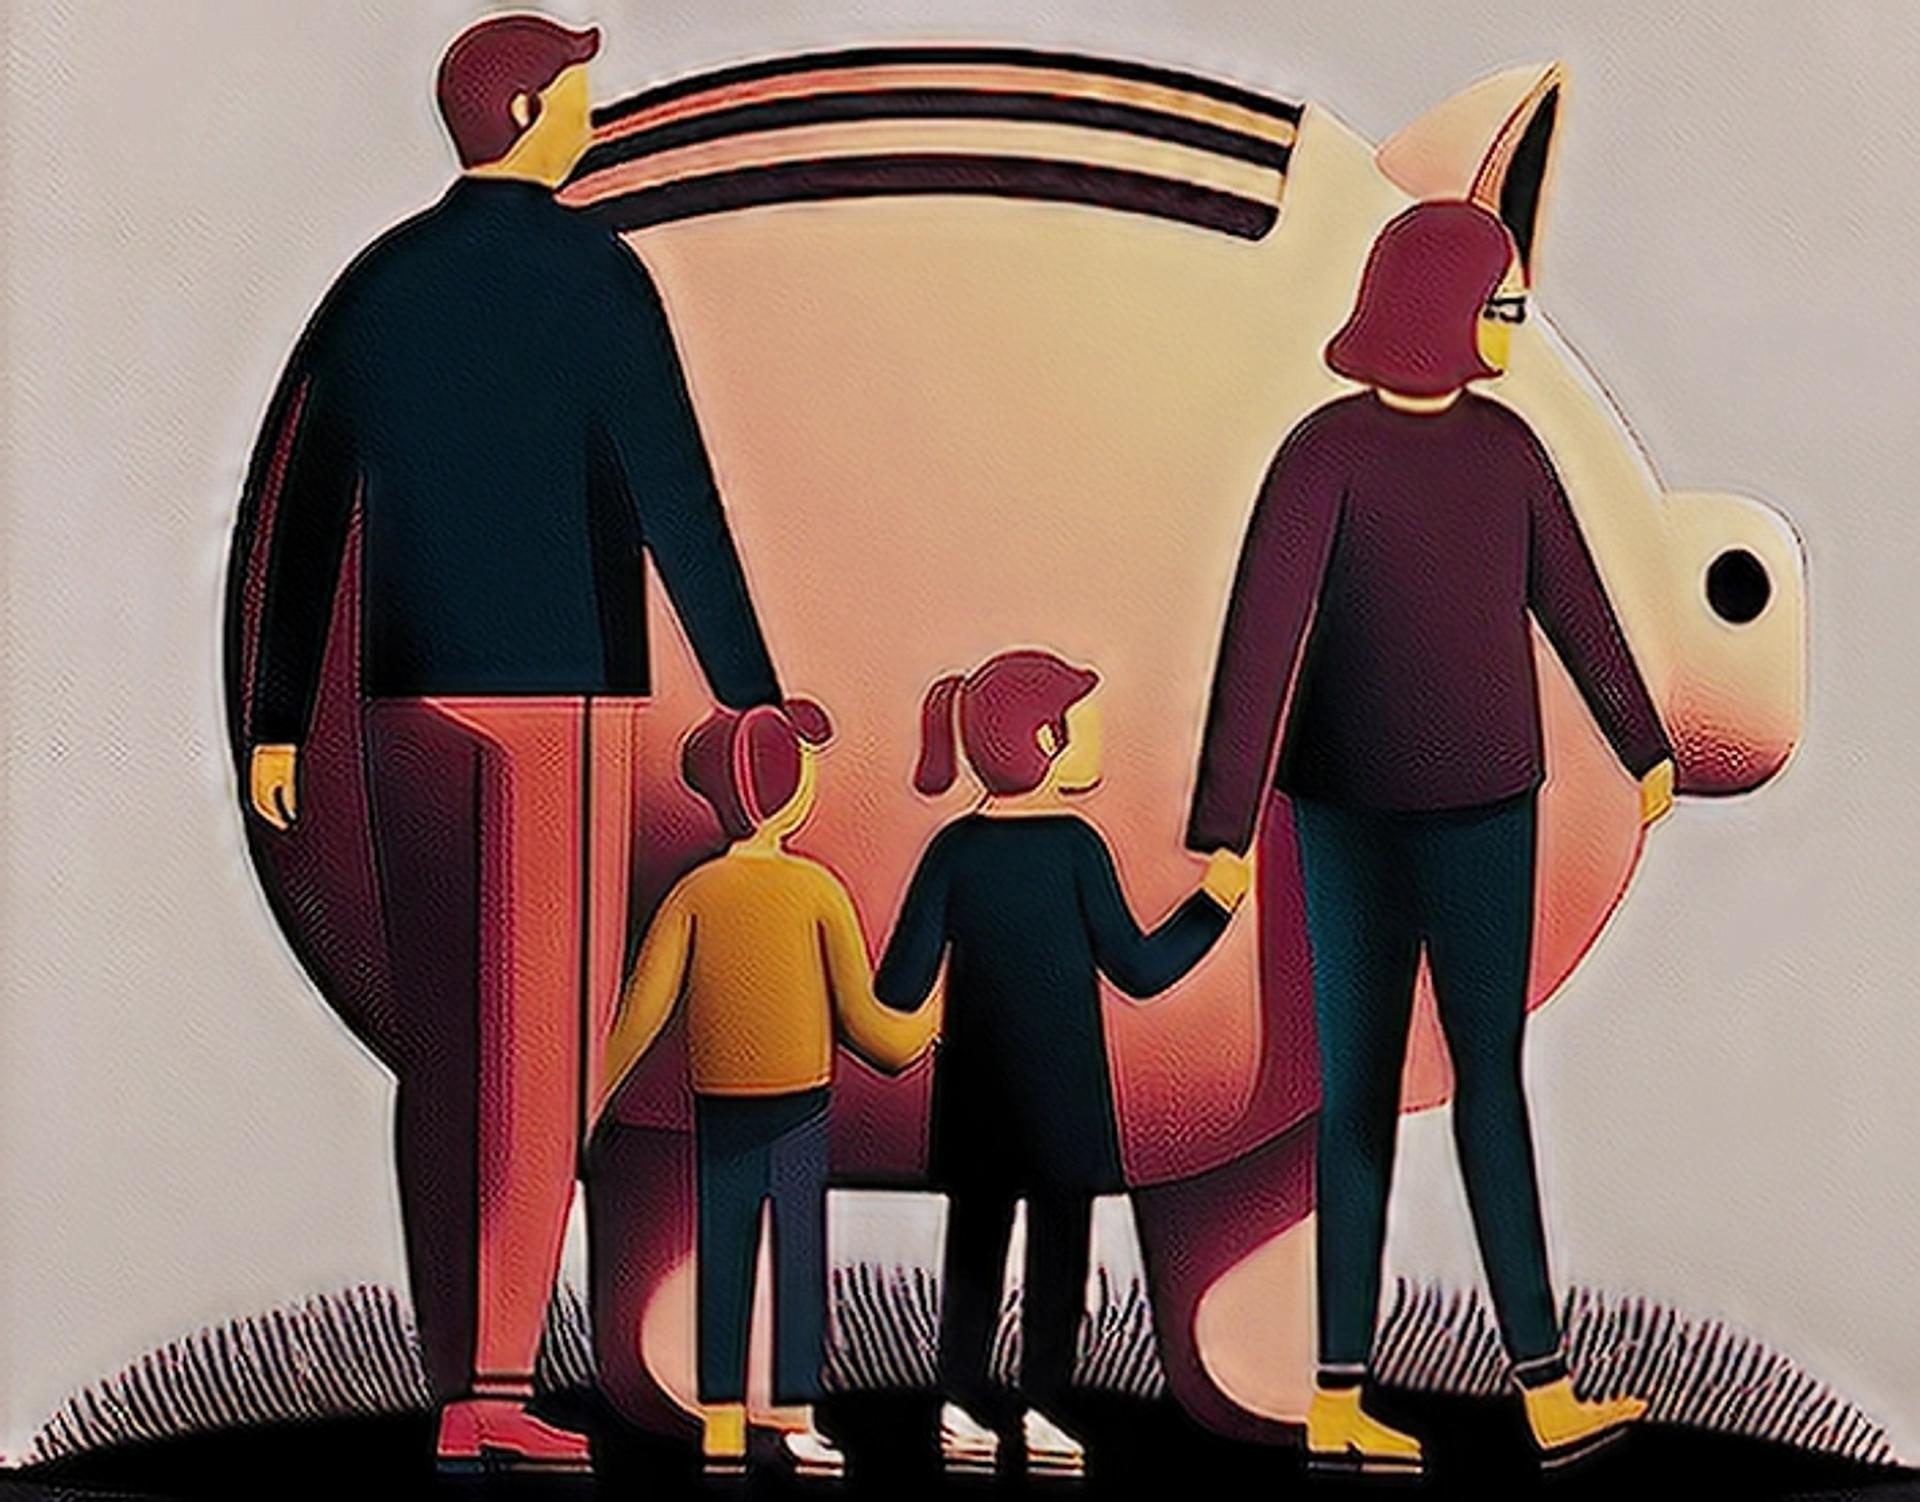 An illustration of a family holding hands and standing in front of a large piggy bank